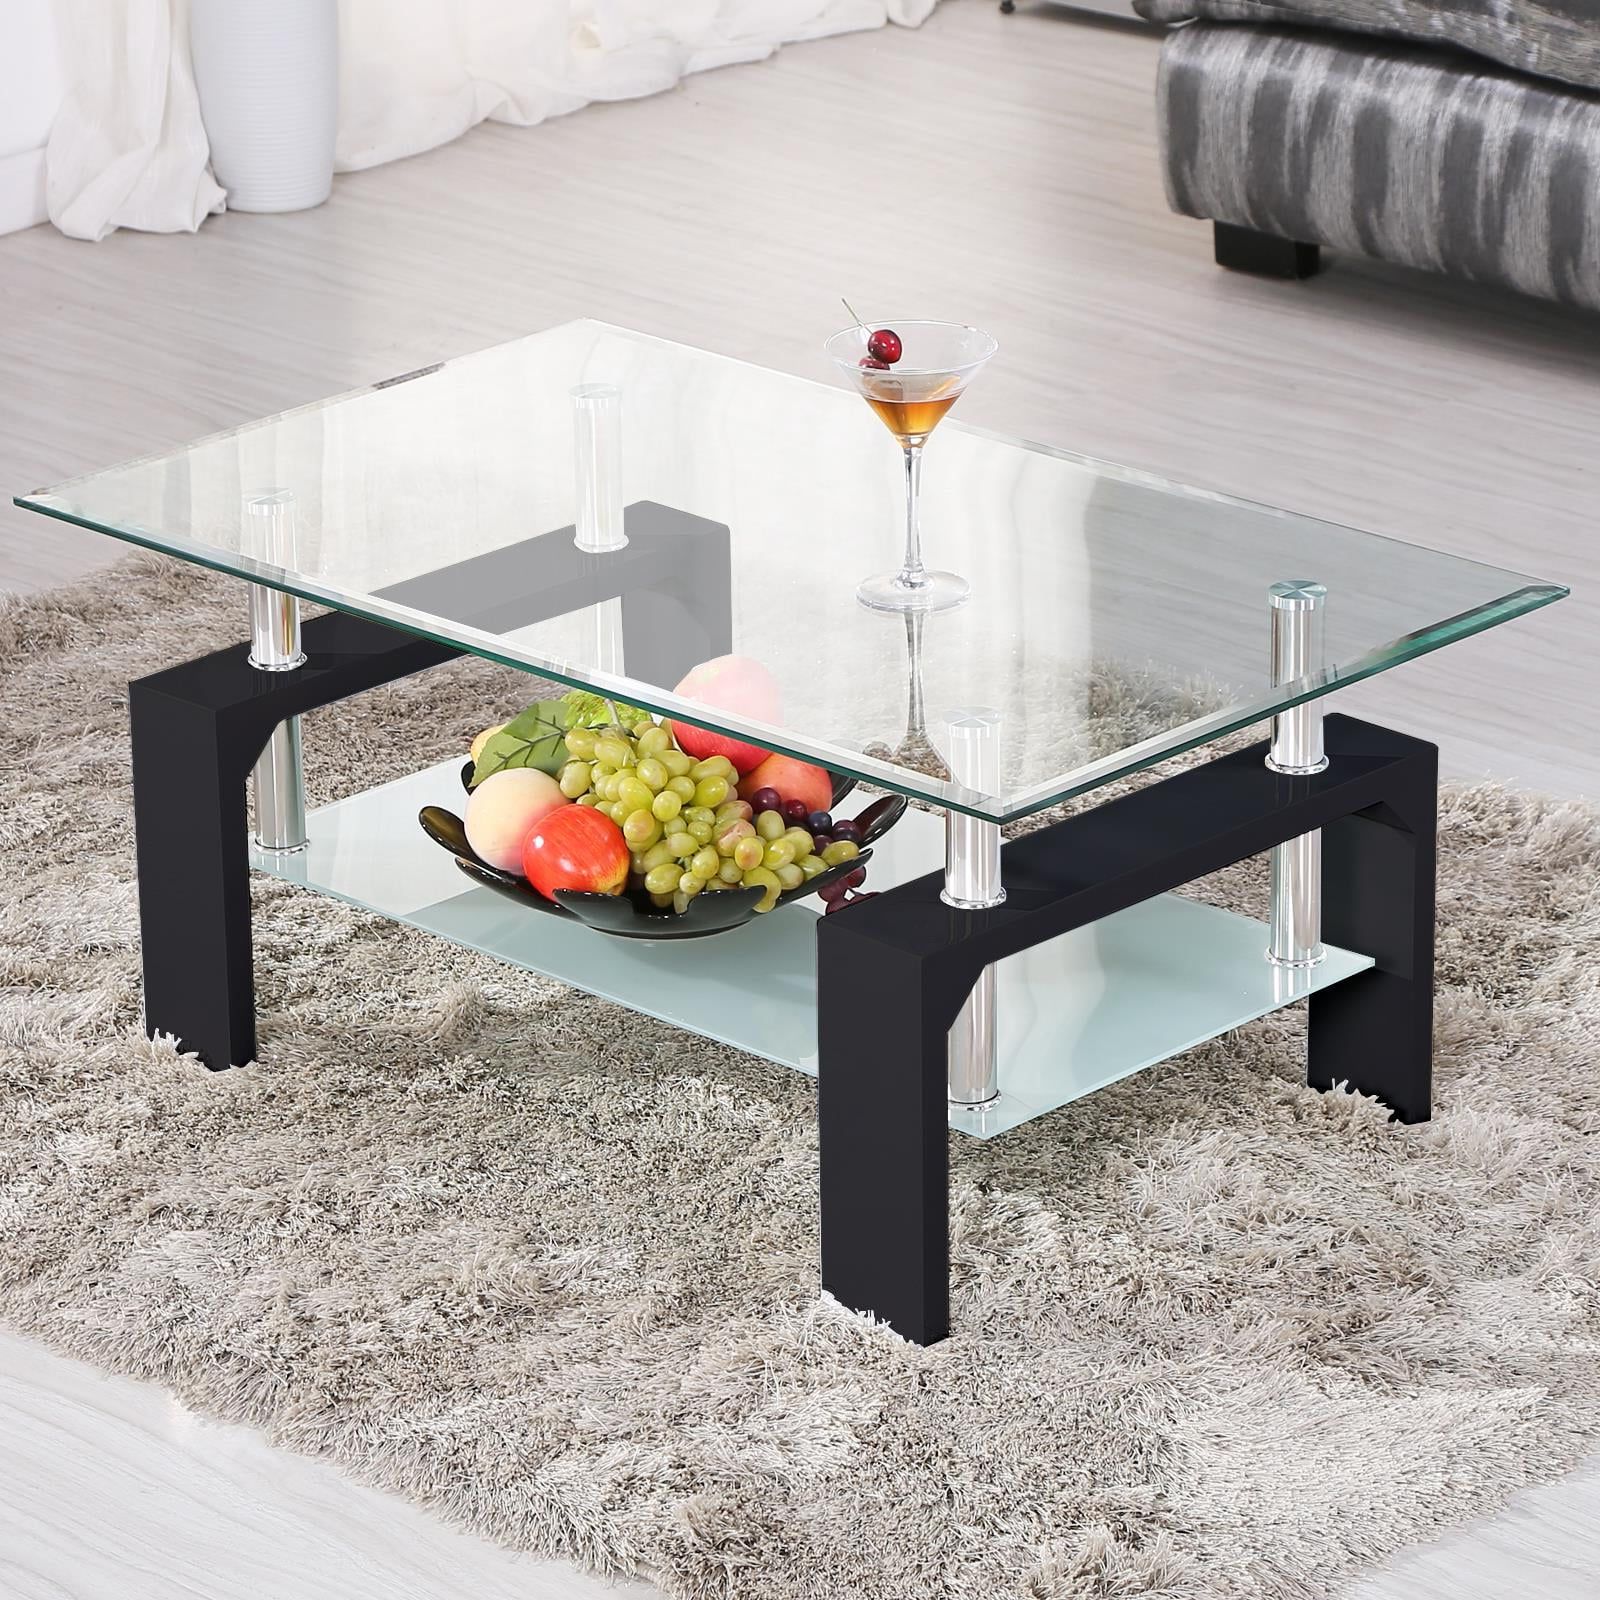 Famous Ktaxon Rectangular Glass Coffee Table Shelf Wood Living Room Furniture Pertaining To Glass Top Coffee Tables (View 12 of 15)